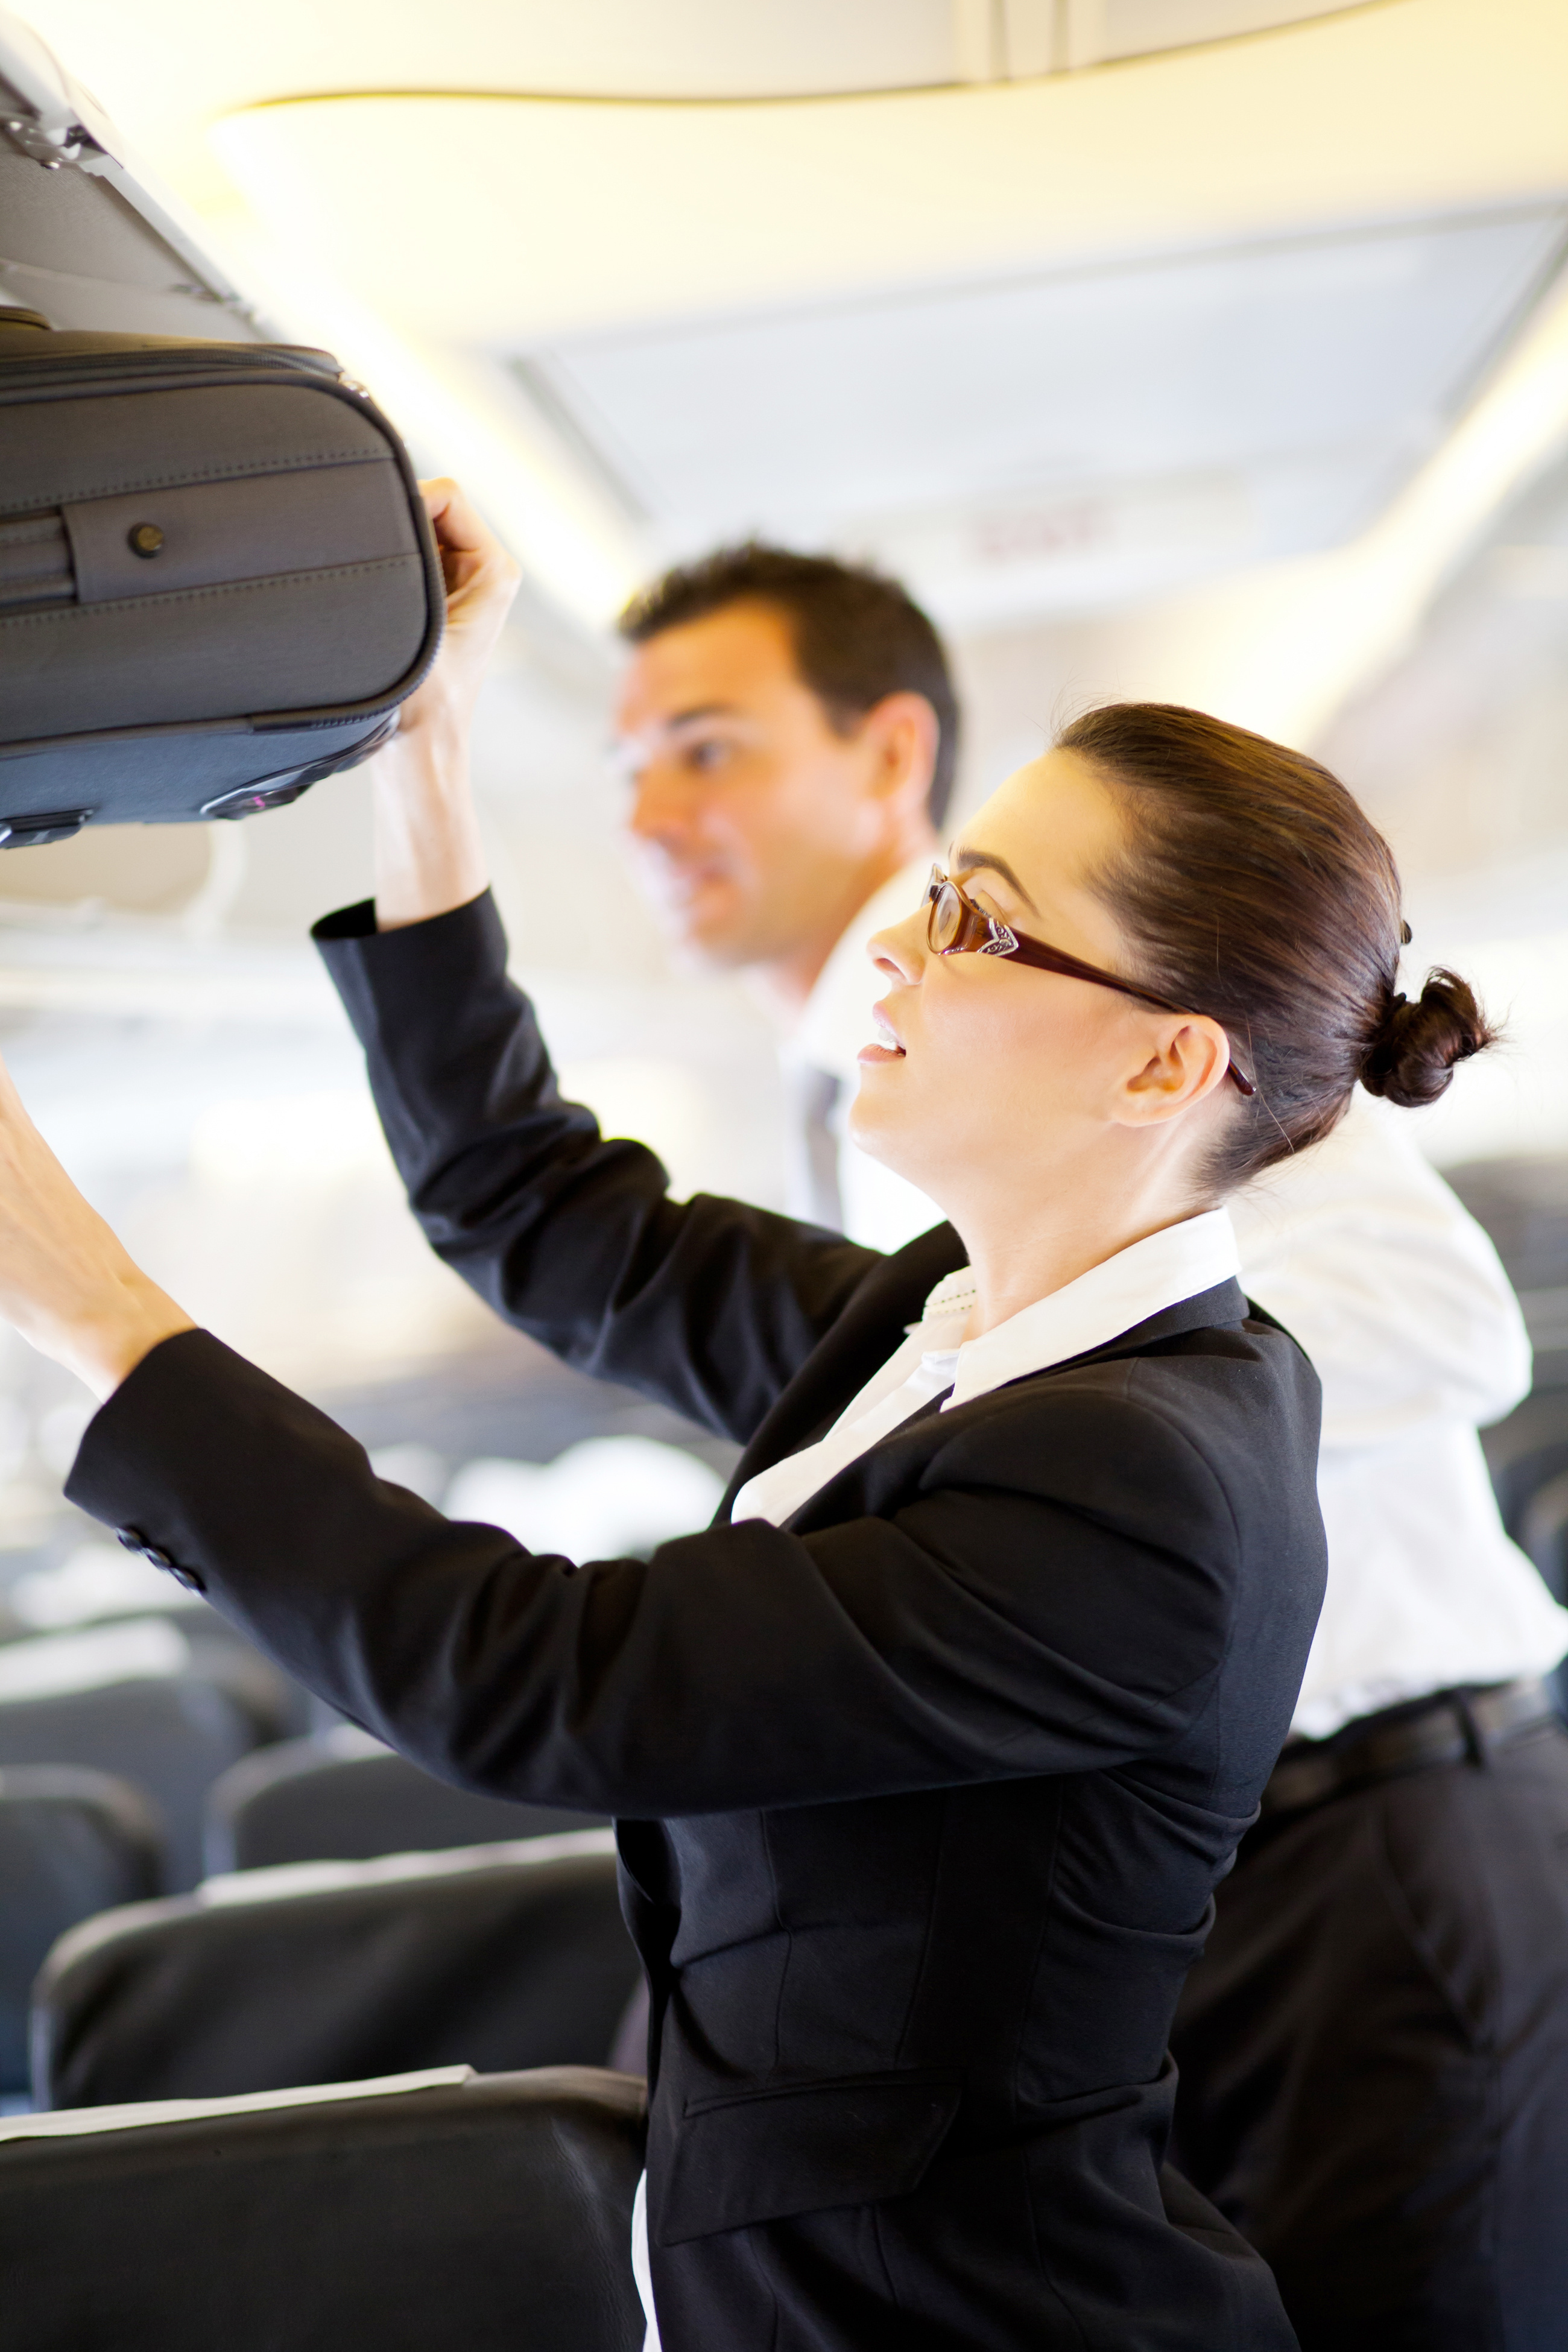 Pauline Frommer’s Tips on Airplane Etiquette